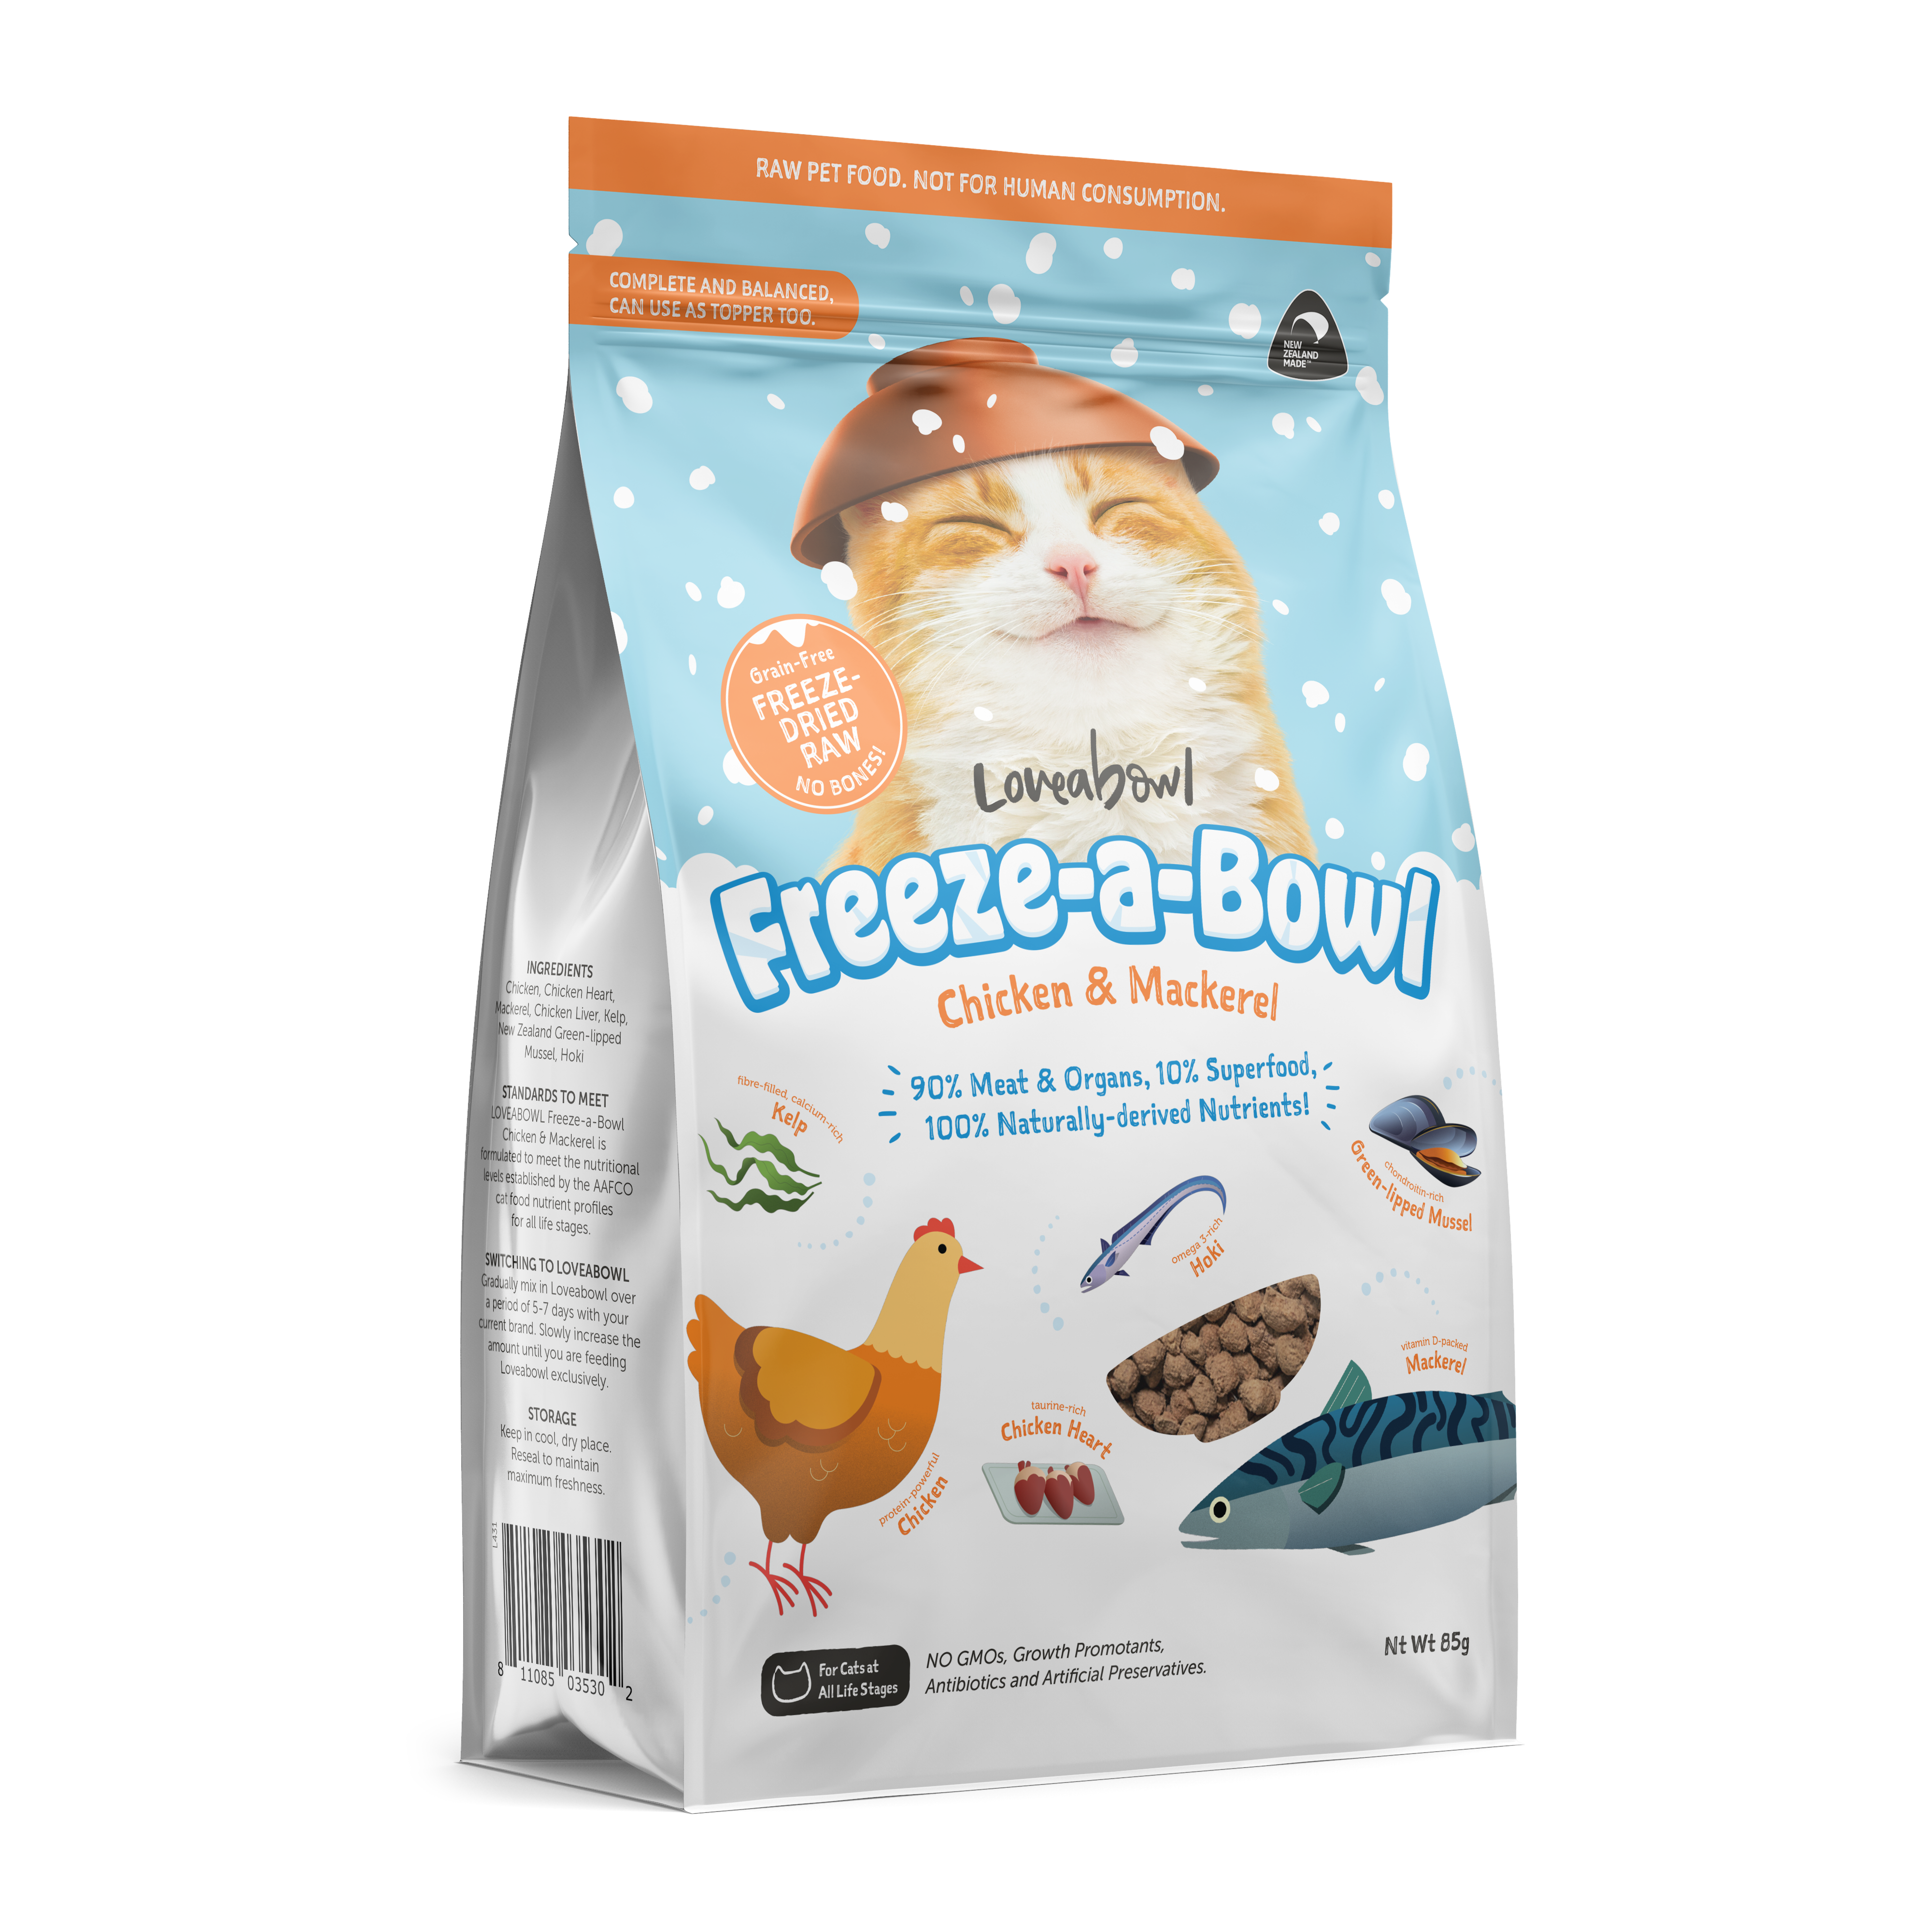 Loveabowl Freeze-a-Bowl Chicken & Mackerel for Cats